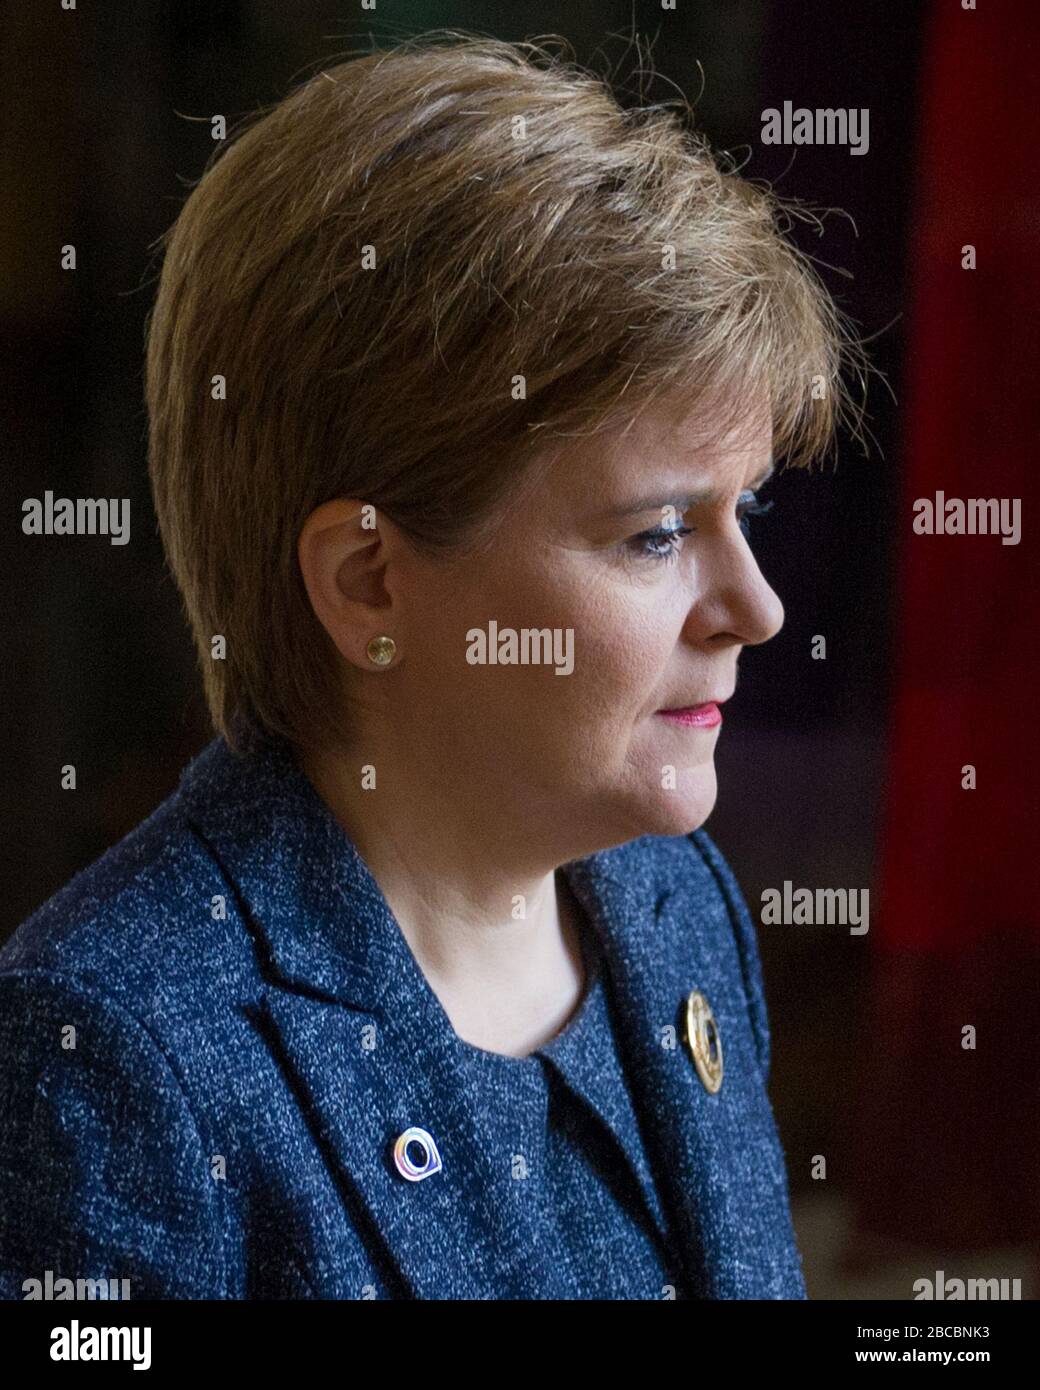 Edinburgh, UK. 30 January 2020.   Pictured: Nicola Sturgeon MSP - First Minister of Scotland and Leader of the Scottish National Party (SNP). Stock Photo